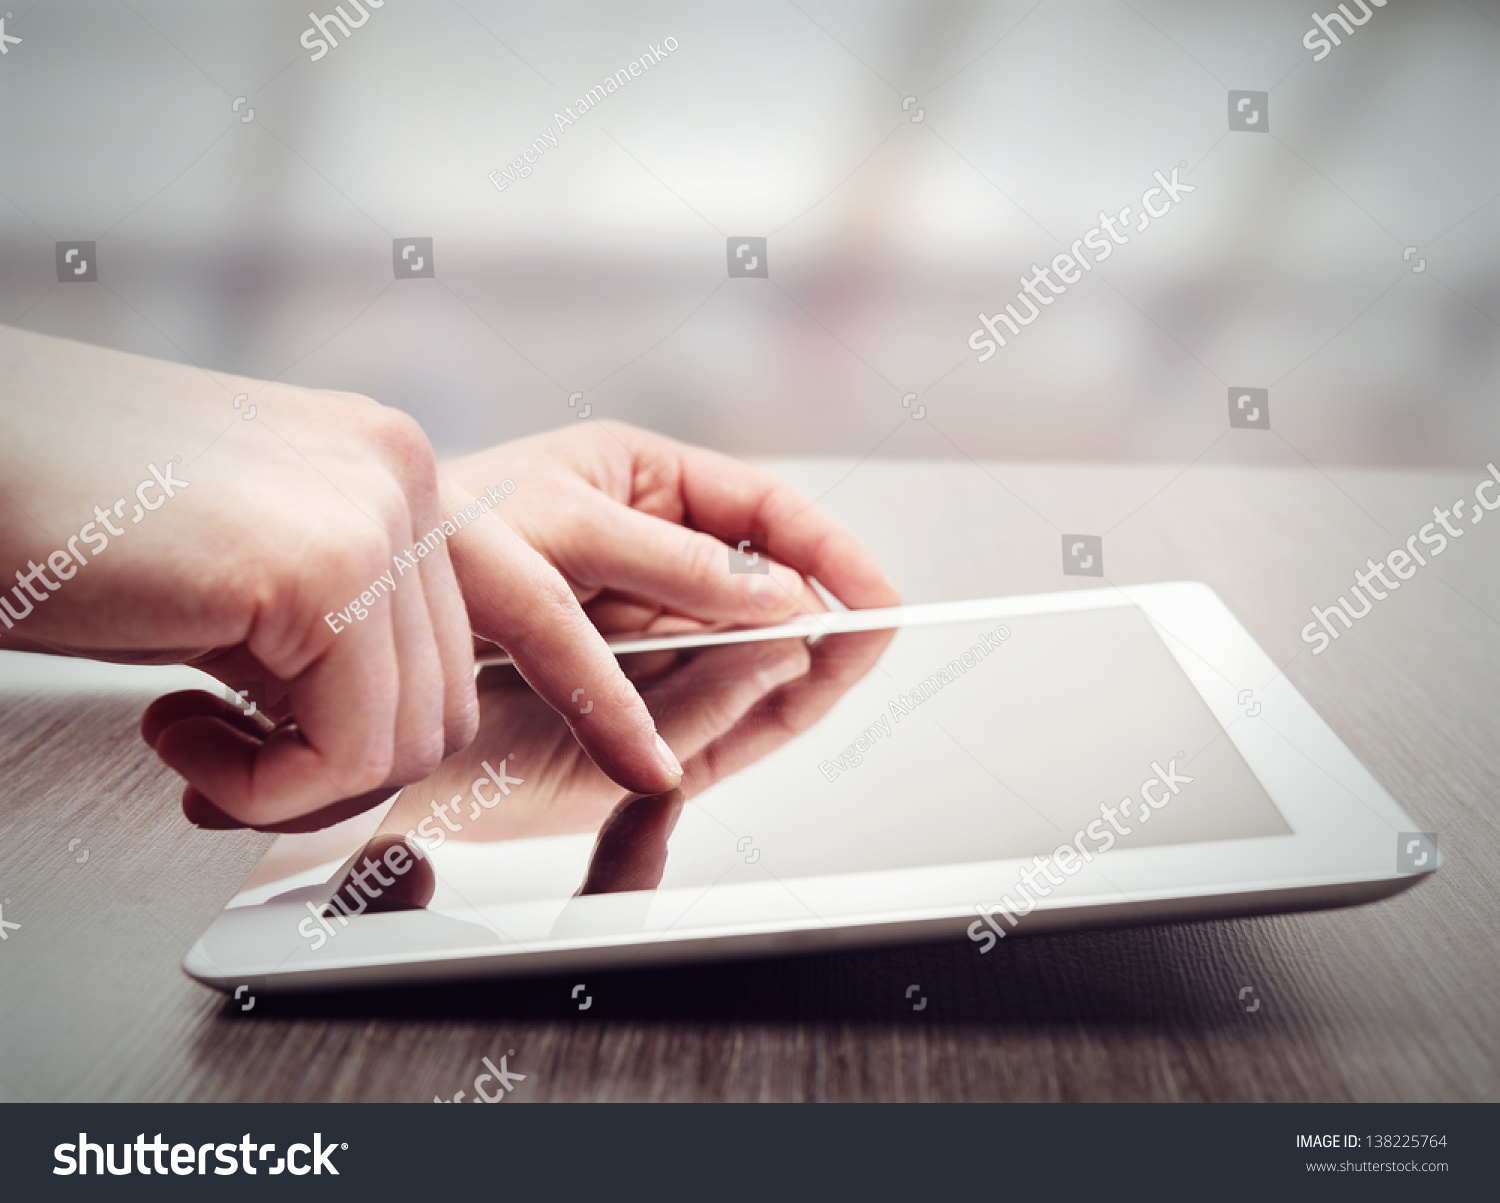 white tablet with a  blank screen in the hands on wooden table #138225764